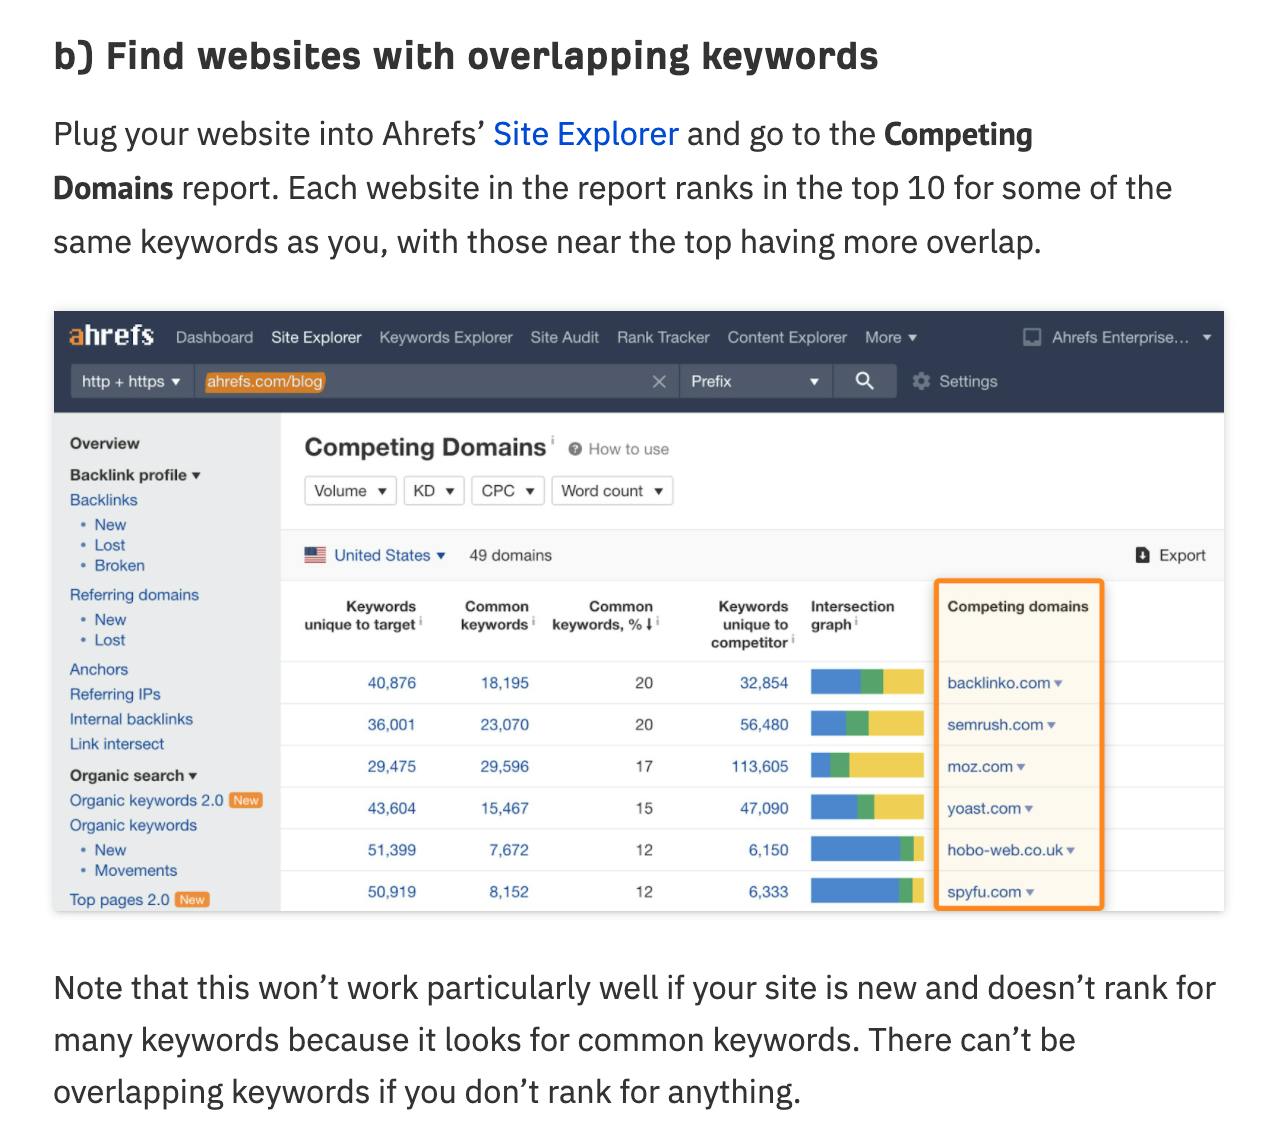 customer marketing example in an ahrefs blog post